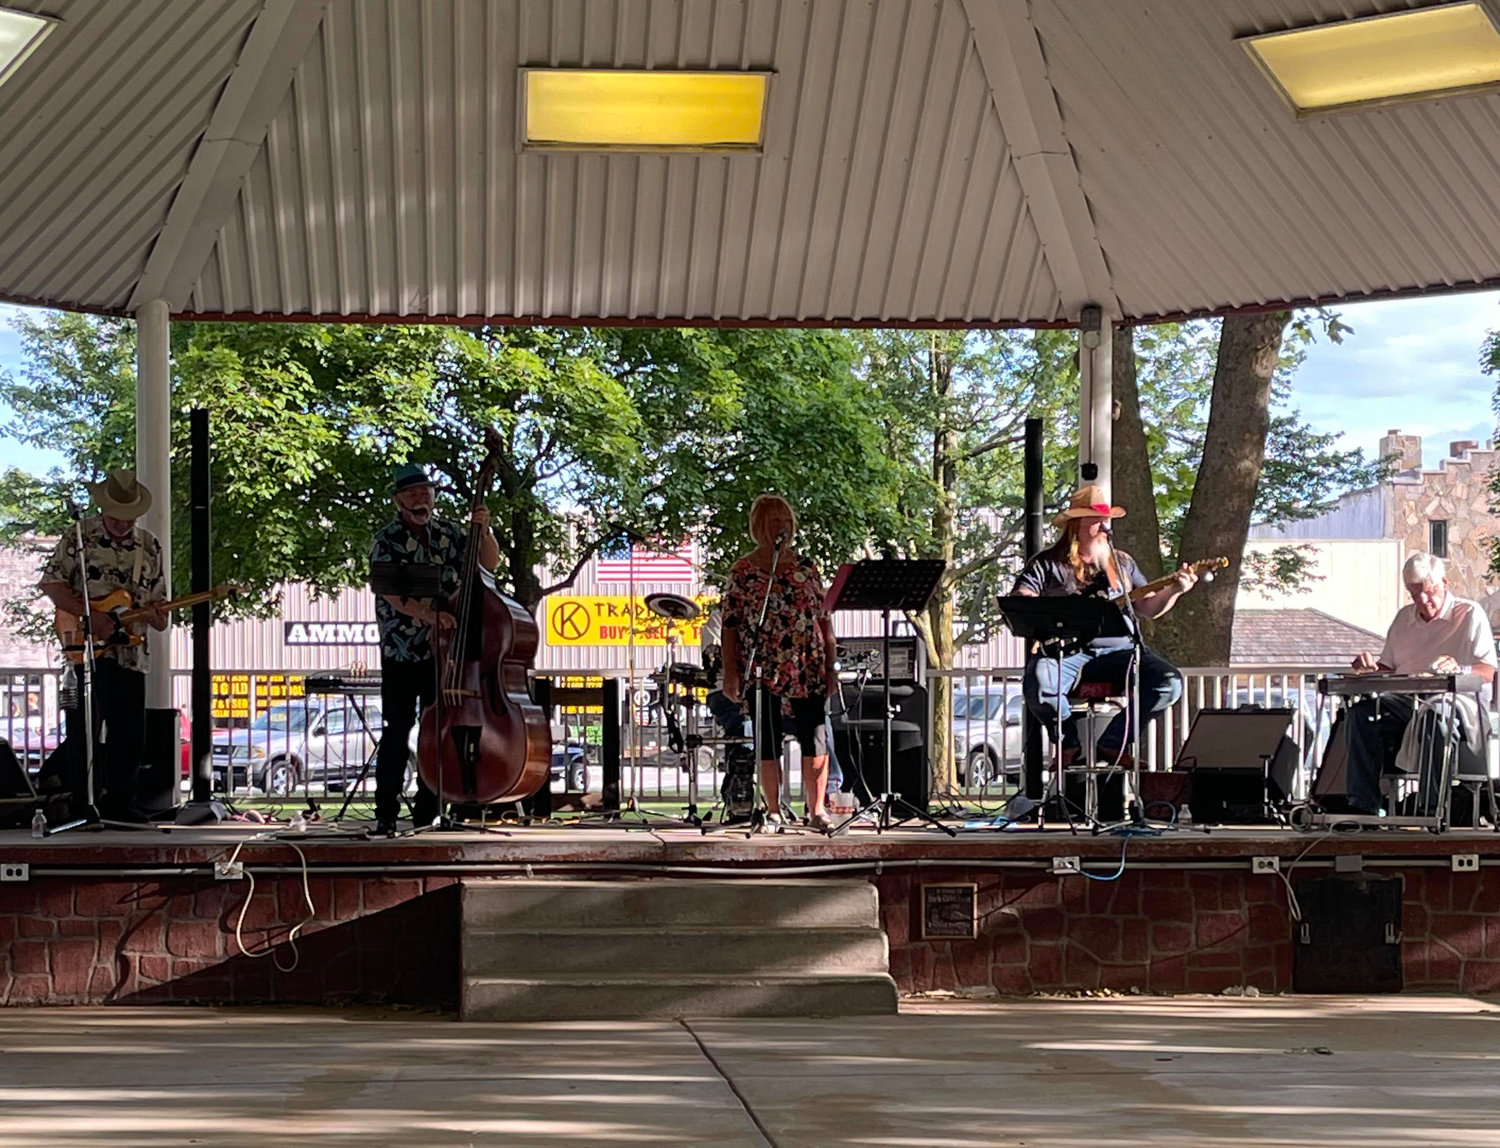 The Ozark Travelers performed under the pavilion on the square to provide entertainment for the benefit.